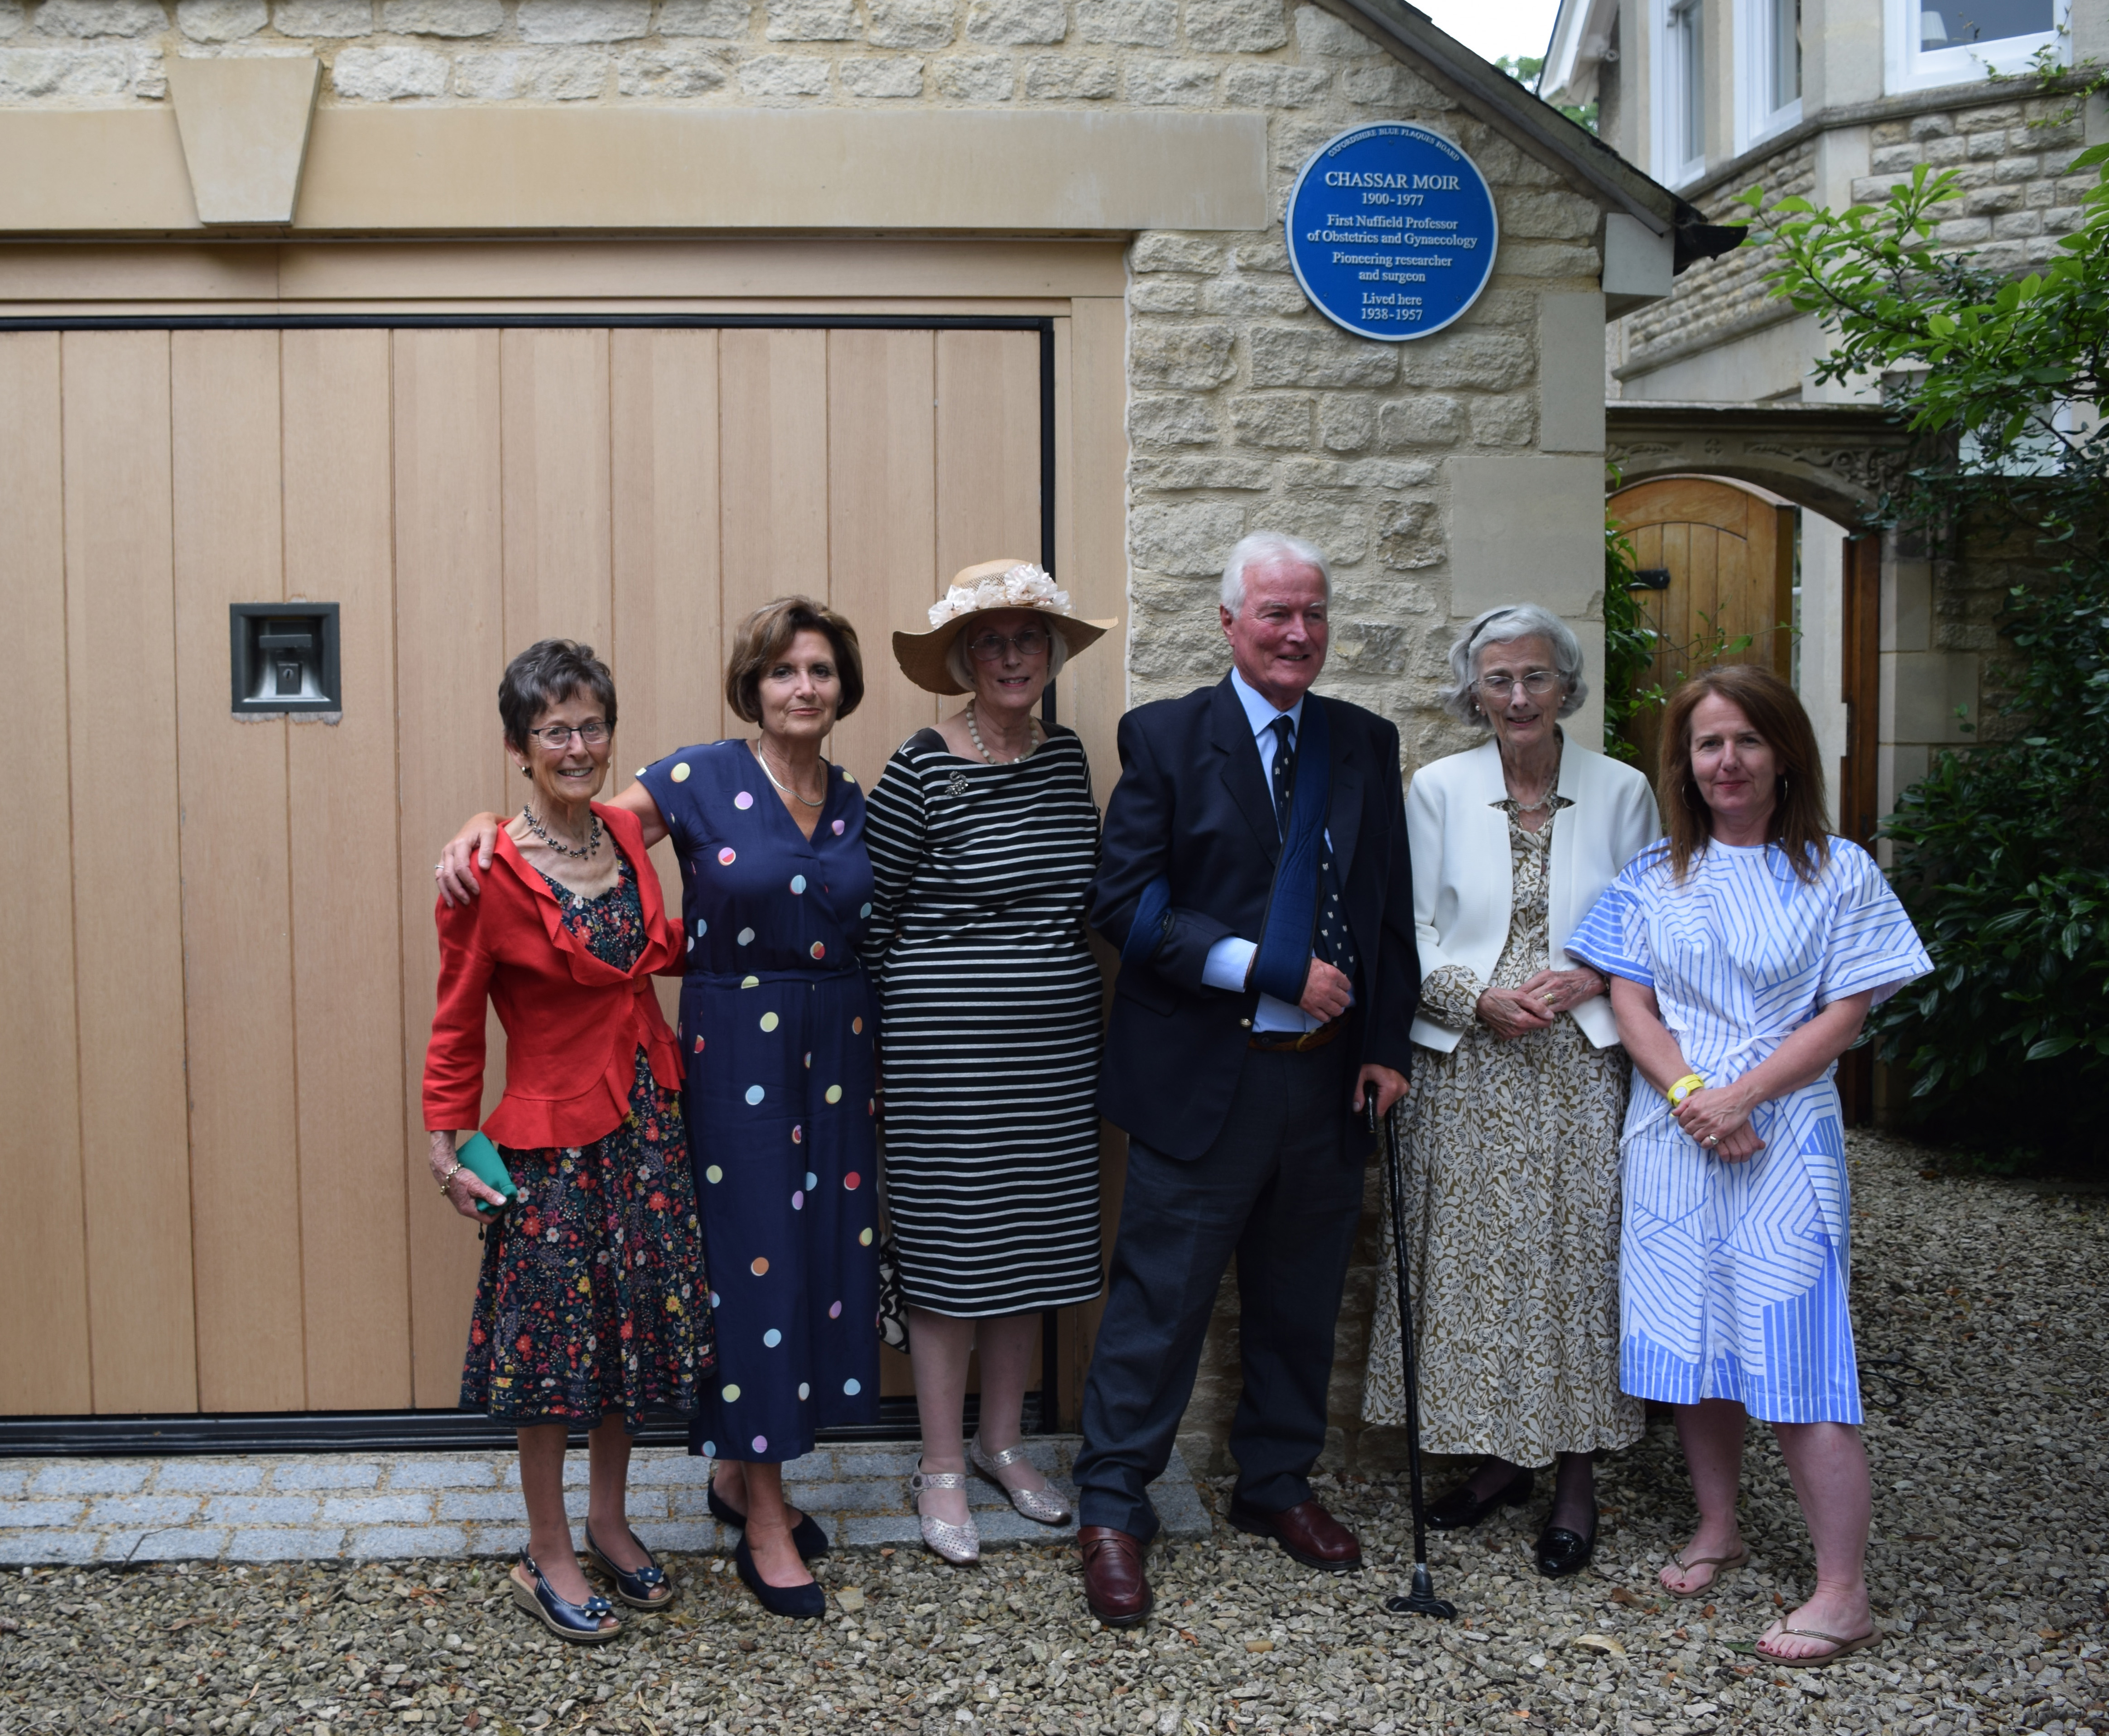 The Moir family at the unveiling of the plaque, from left, Sue, Michelle, Jane, and John Moir, Priscilla Moir-Sharp and Priscilla’s daughter, Fi Glover.